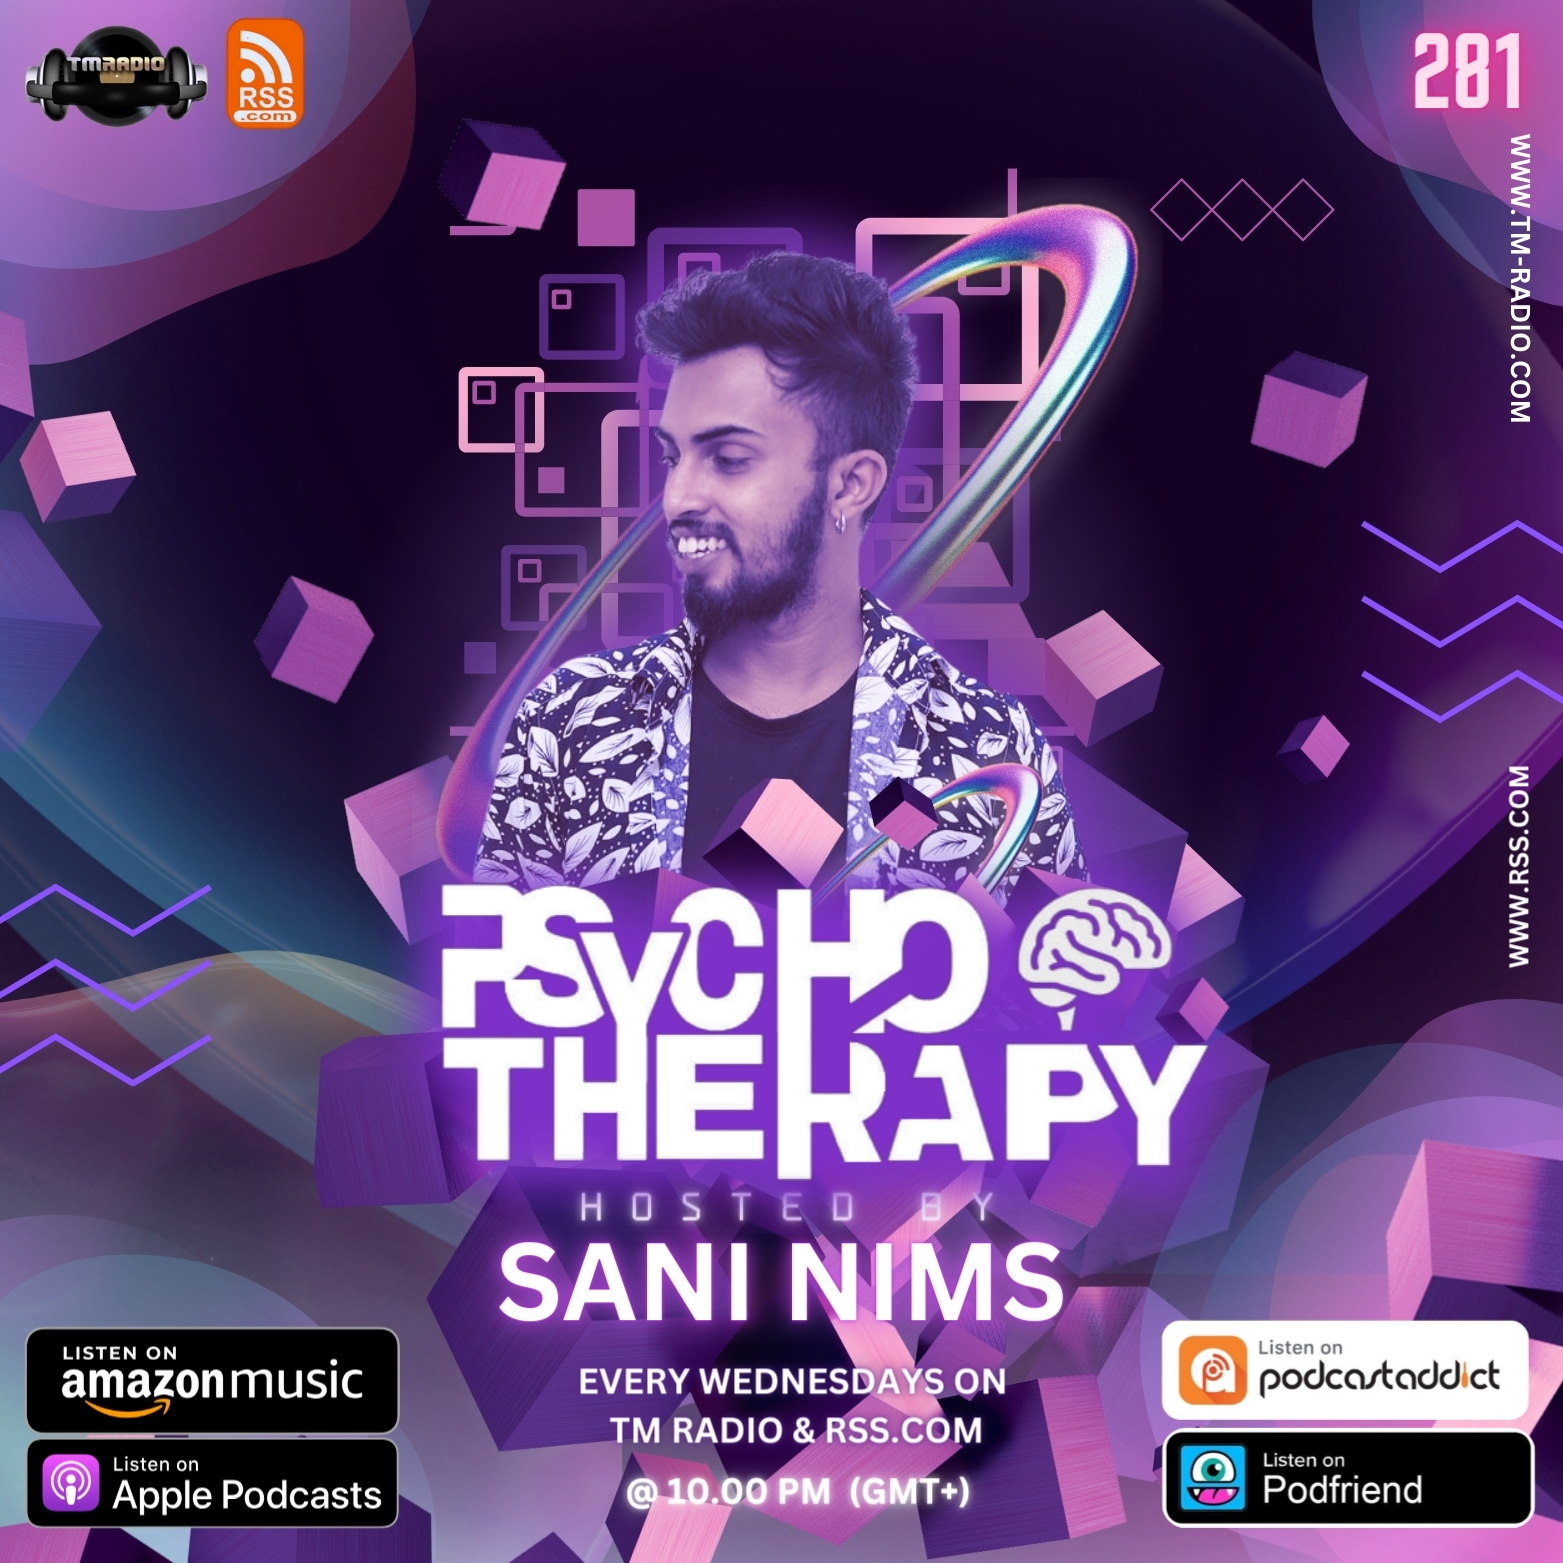 PSYCHO THERAPY EP 281 BY SANI NIMS ON TM RADIO (from February 21st)